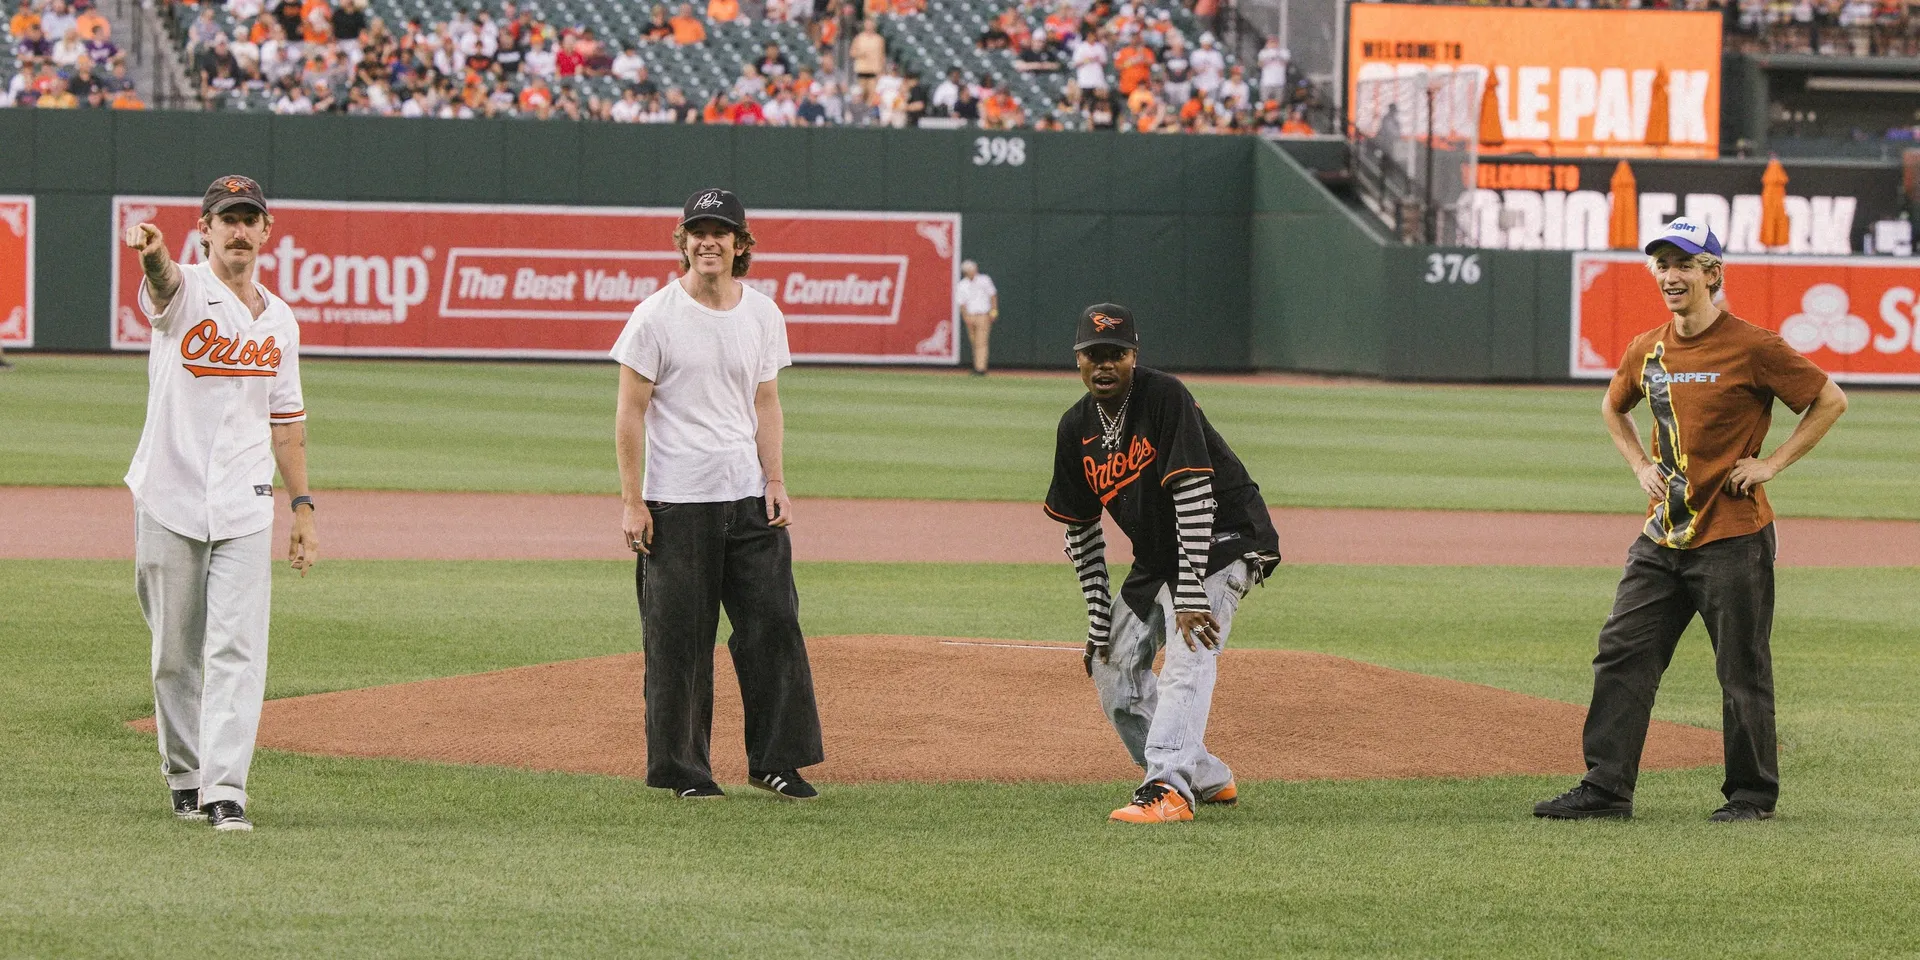 Turnstile Throw First Pitch at Baltimore Orioles Game: Watch